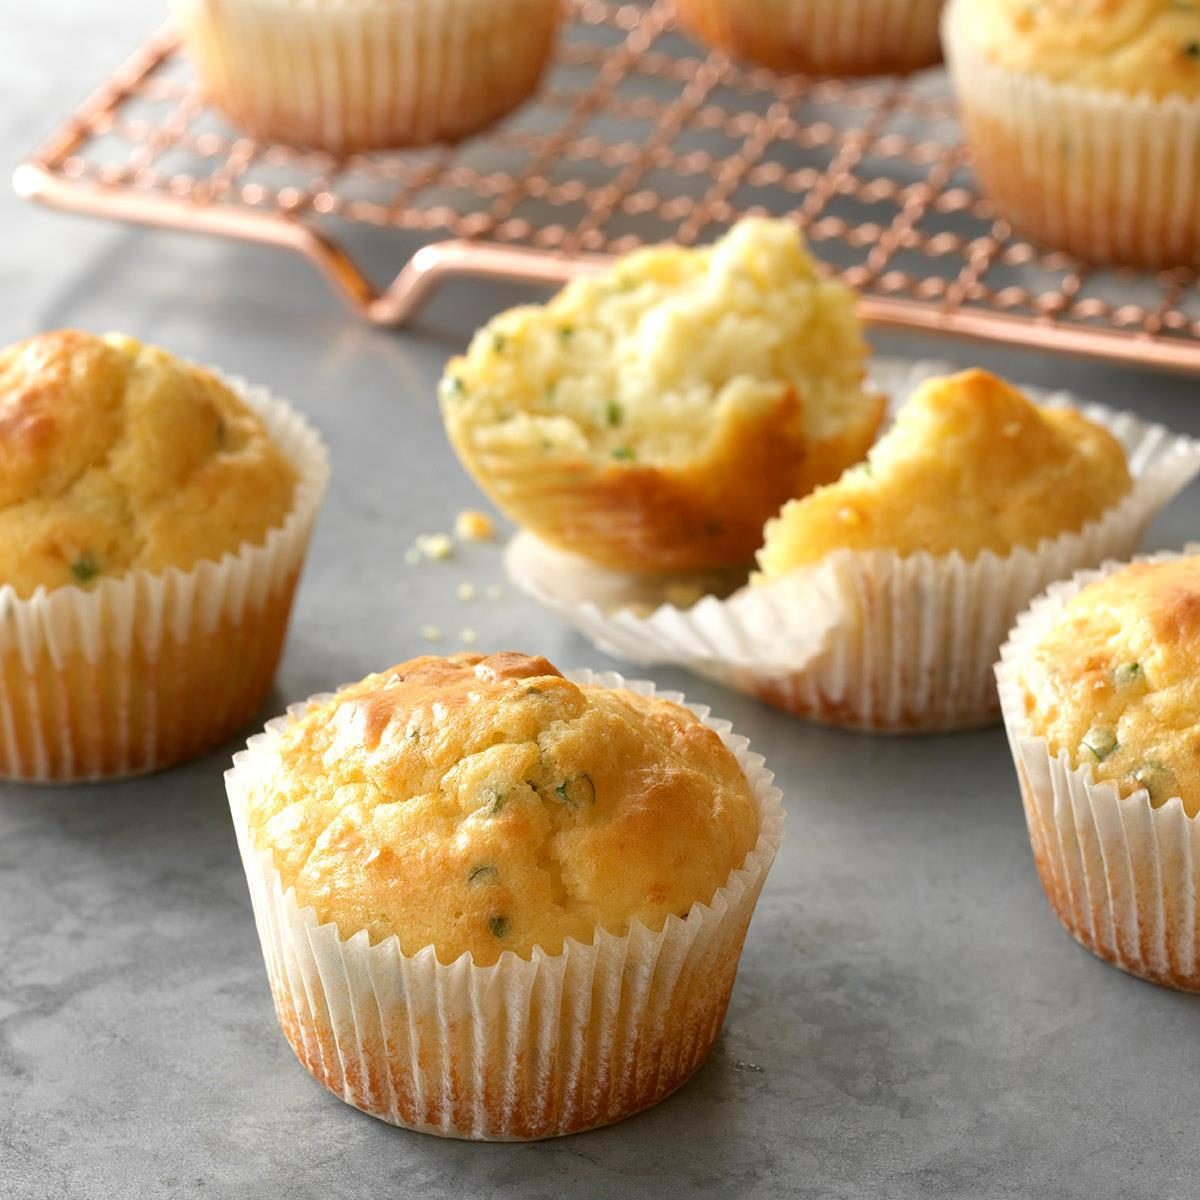 Feta N Chive Muffins Exps Chmz19 31173 C10 26 2b 4